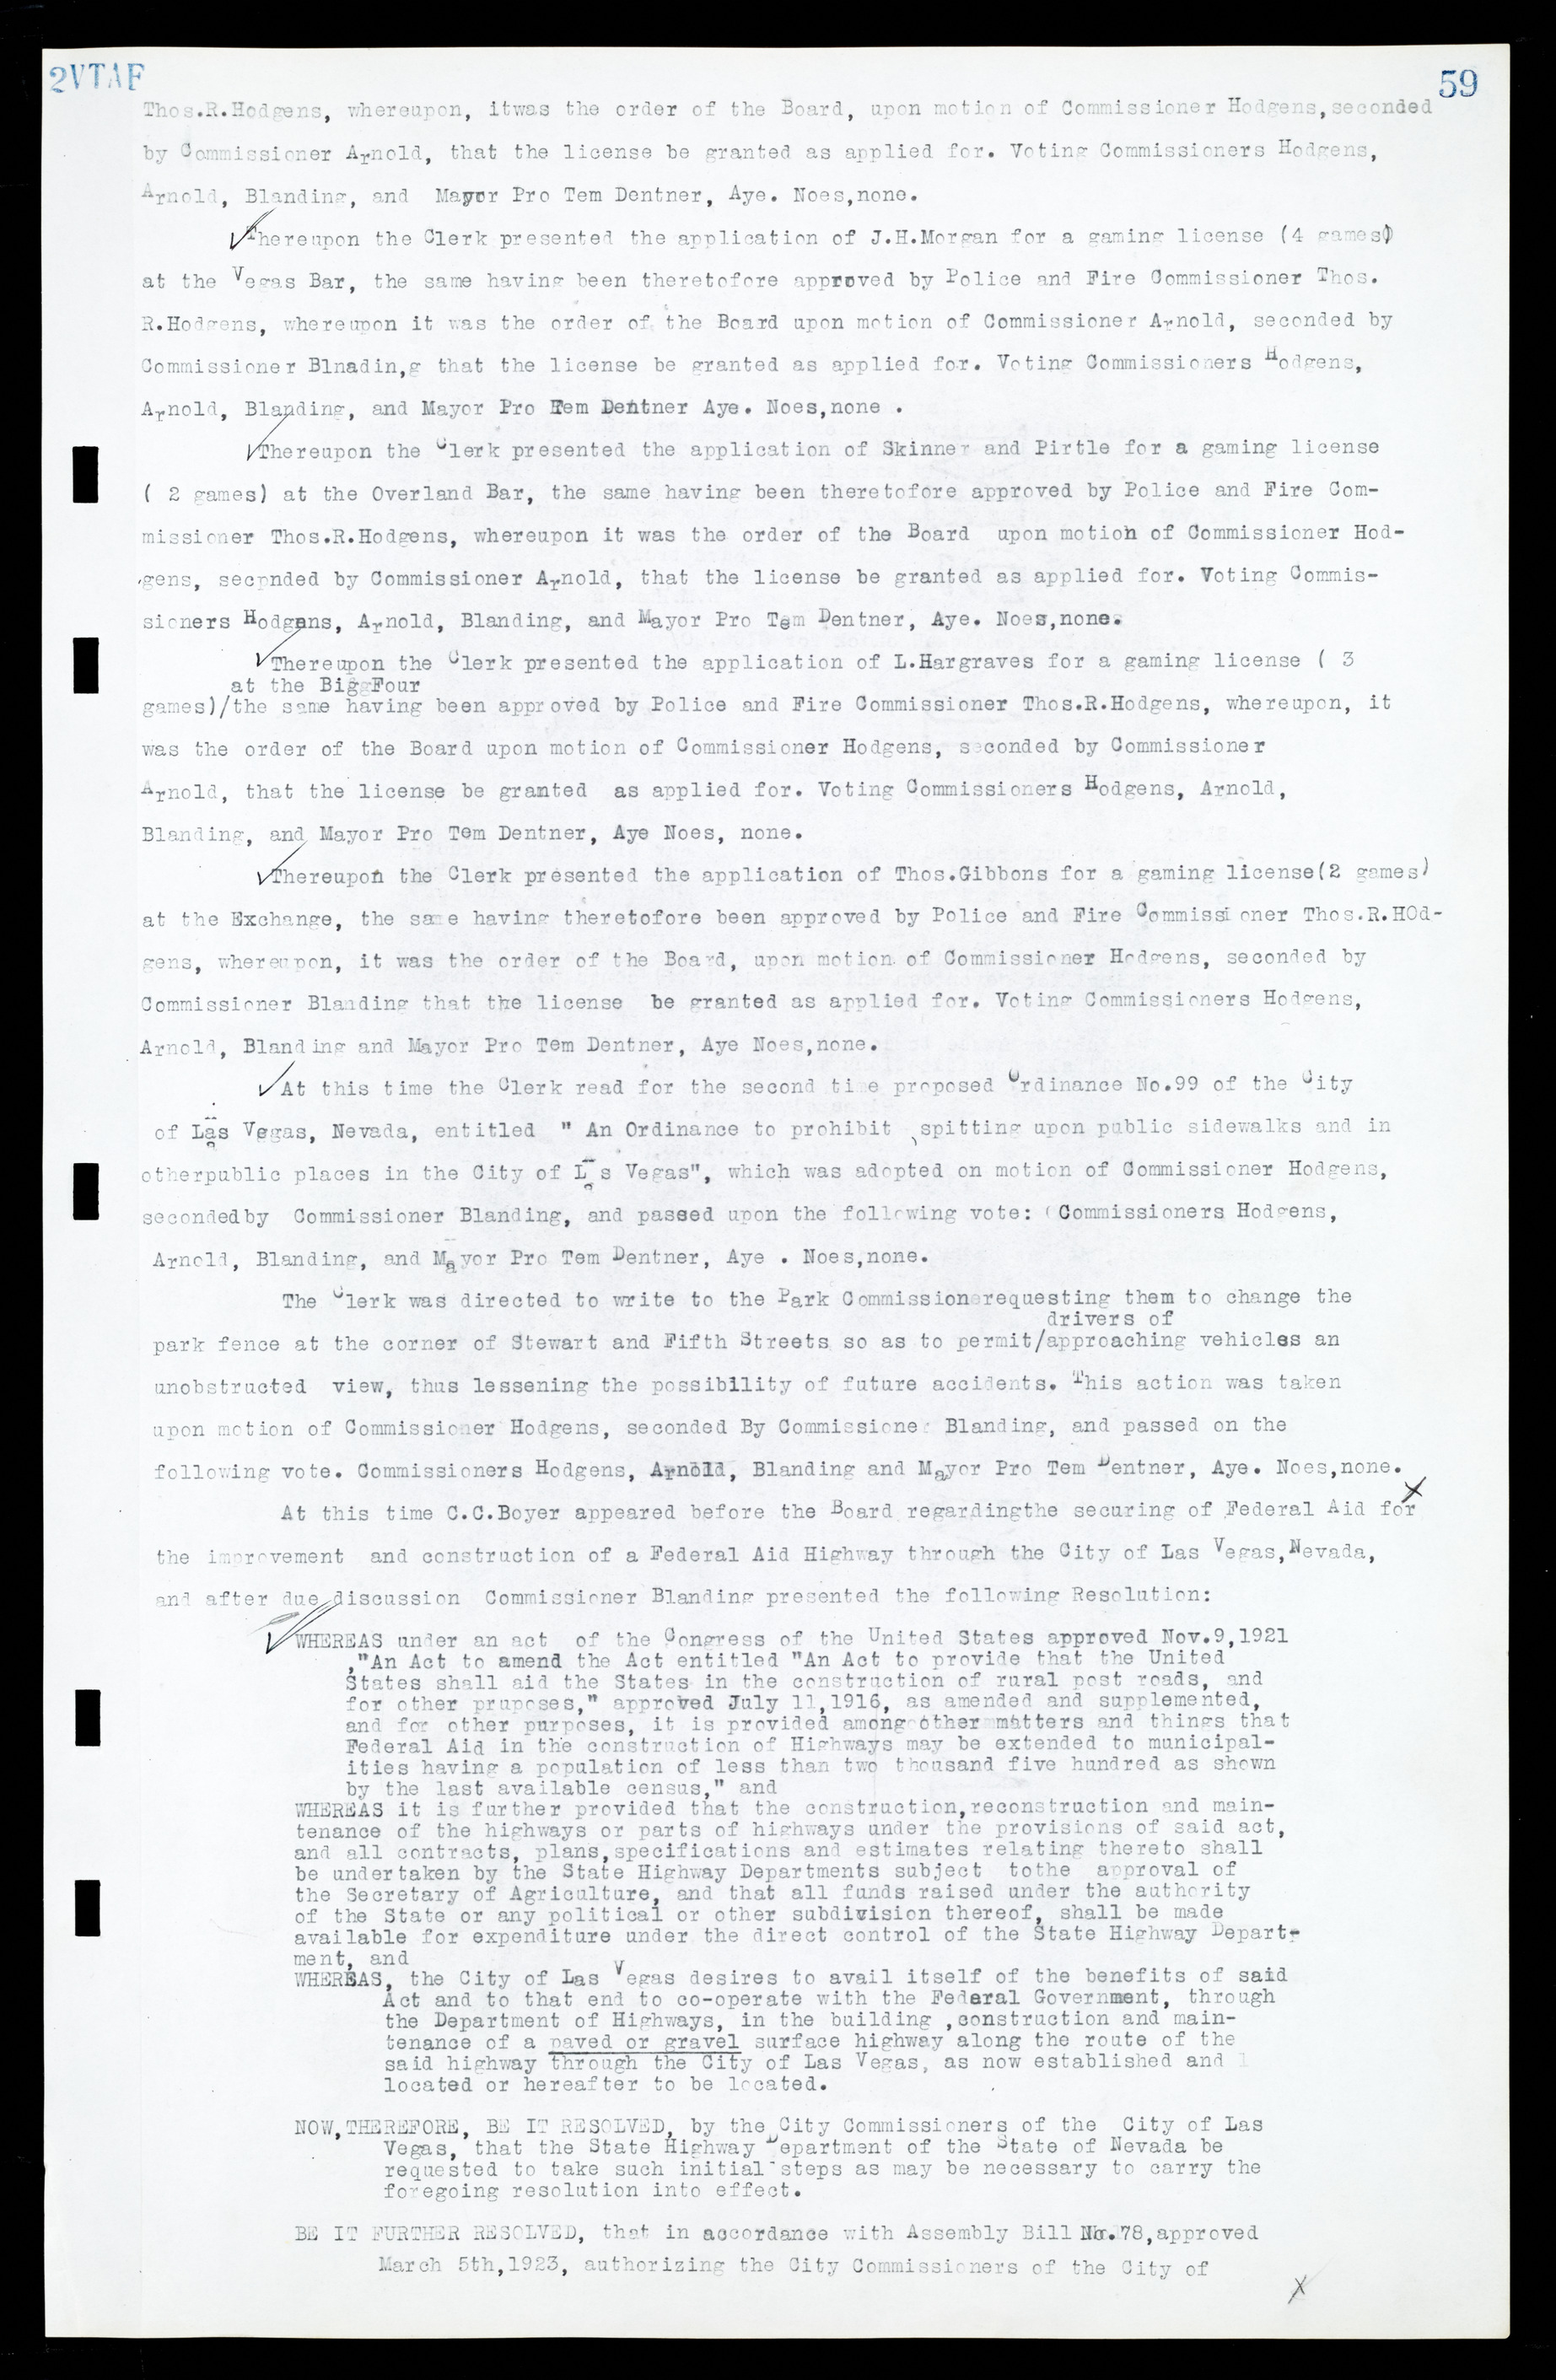 Las Vegas City Commission Minutes, March 1, 1922 to May 10, 1929, lvc000002-66